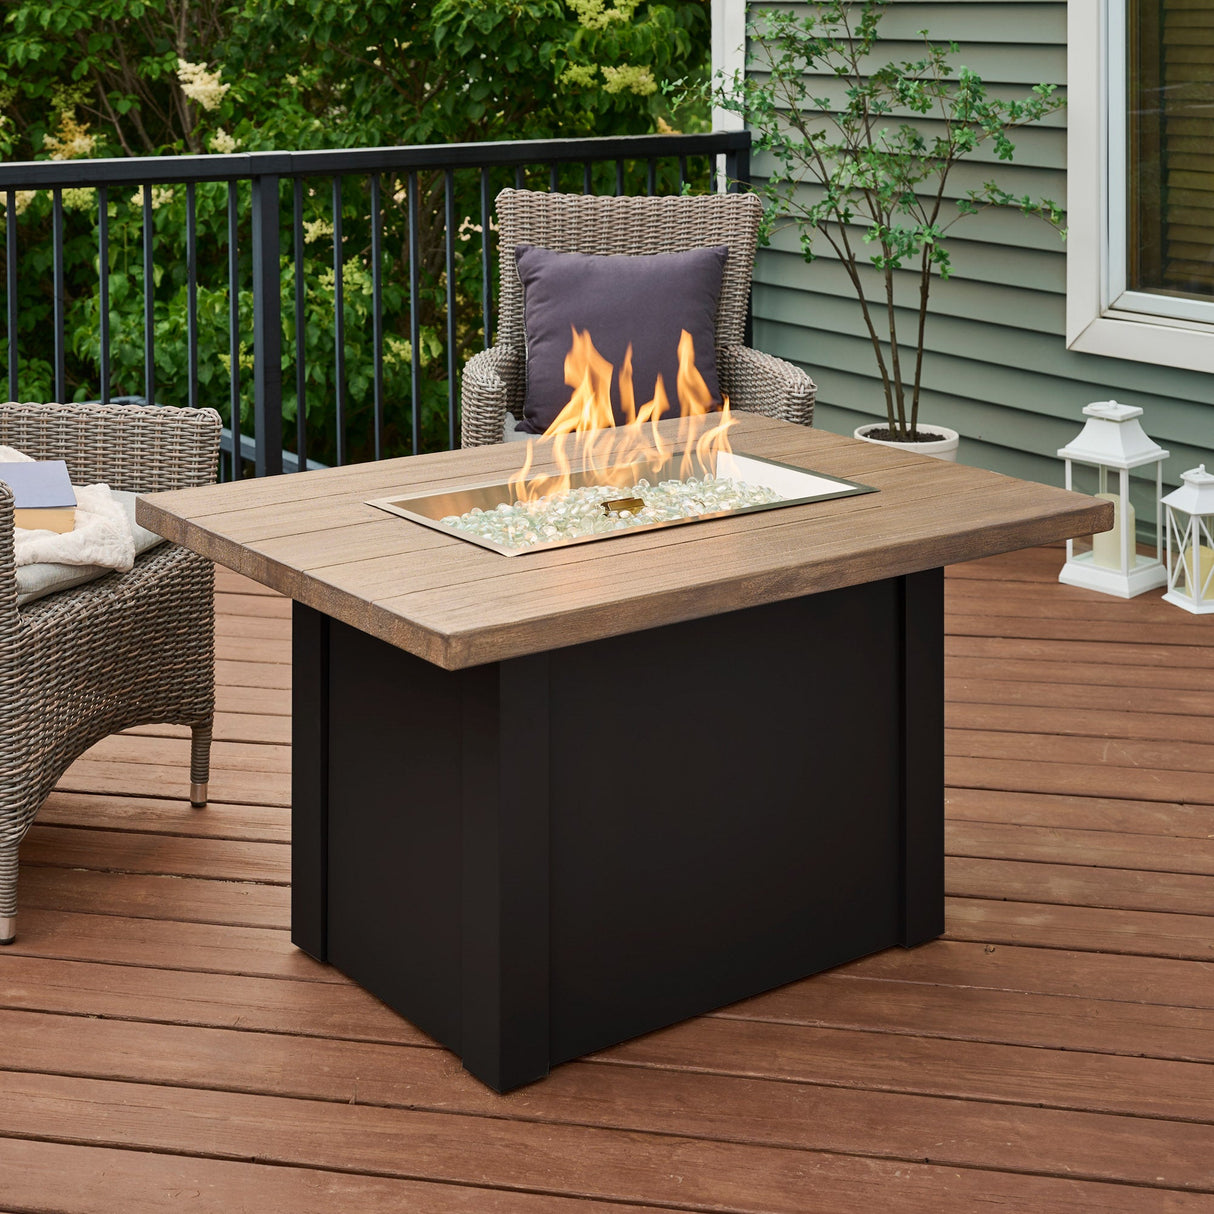 The Havenwood Rectangular Gas Fire Pit Table with a Driftwood top and Luverne Black base on an outdoor patio